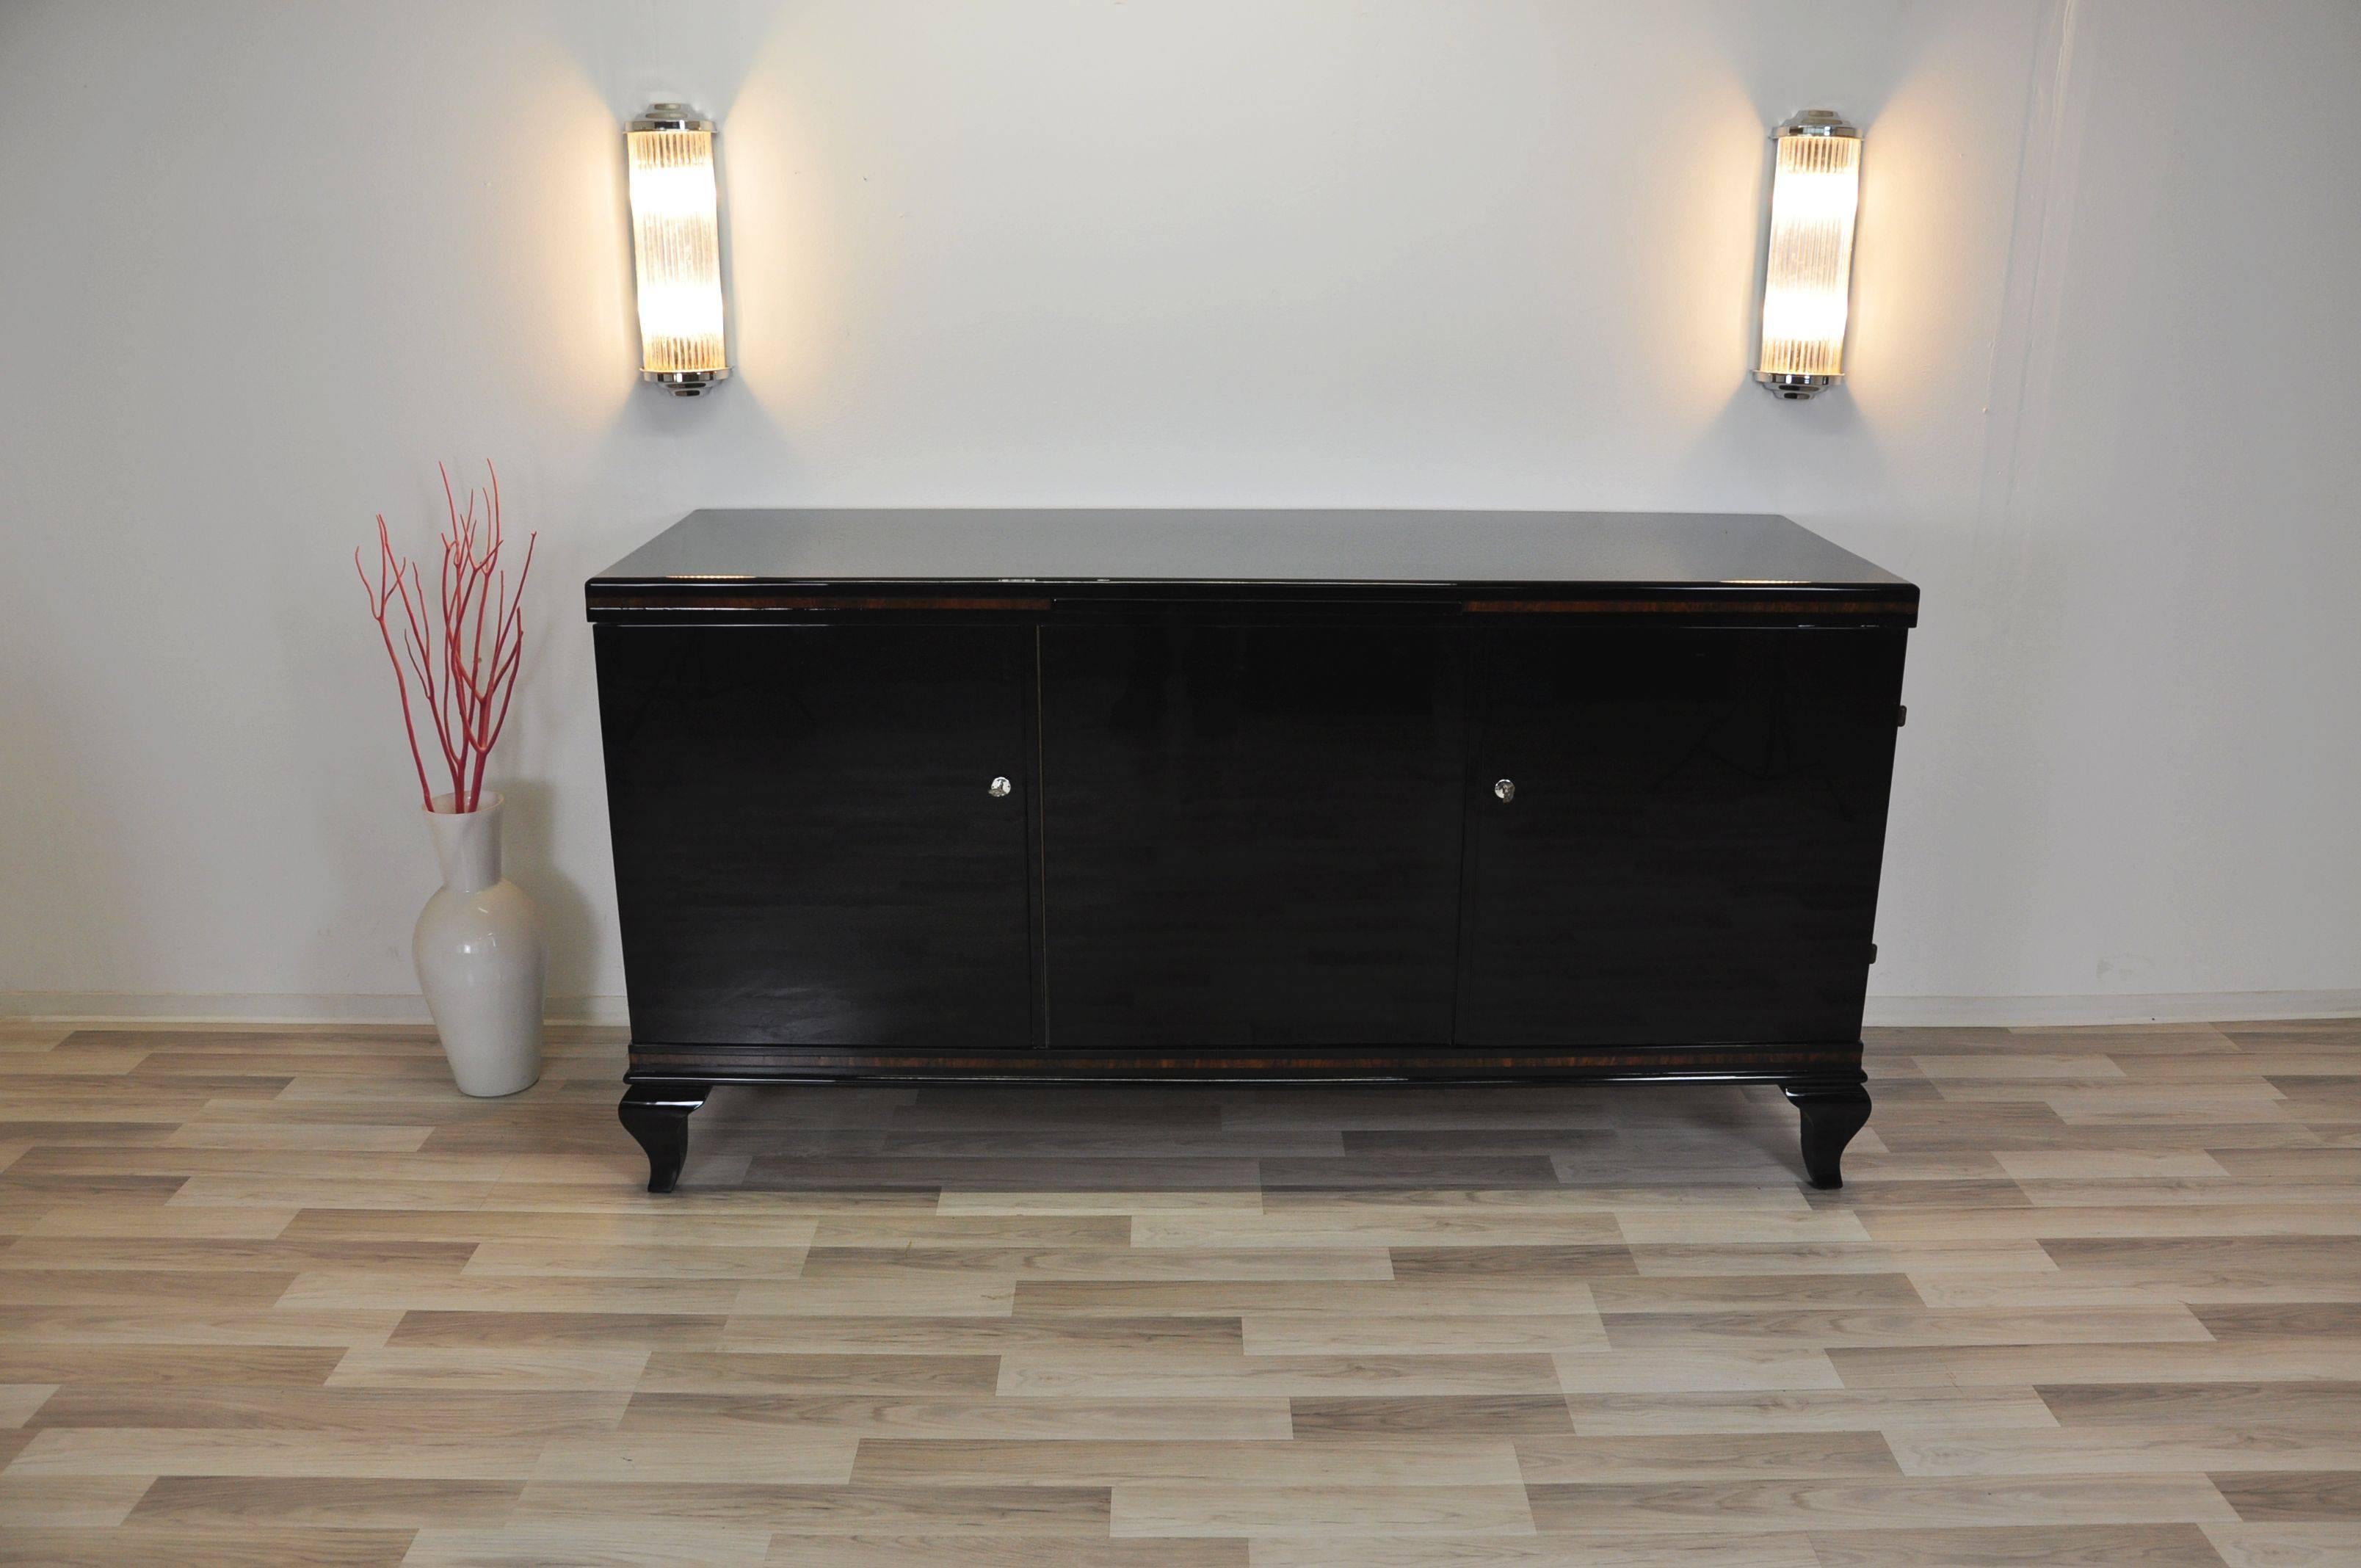 Simple sideboard with great feet from the Art Deco era. The elegant and plain design is complemented with beautifully carved feet. You will find cherry wood details on the top and bottom plates. The complete body is painted with our signature black